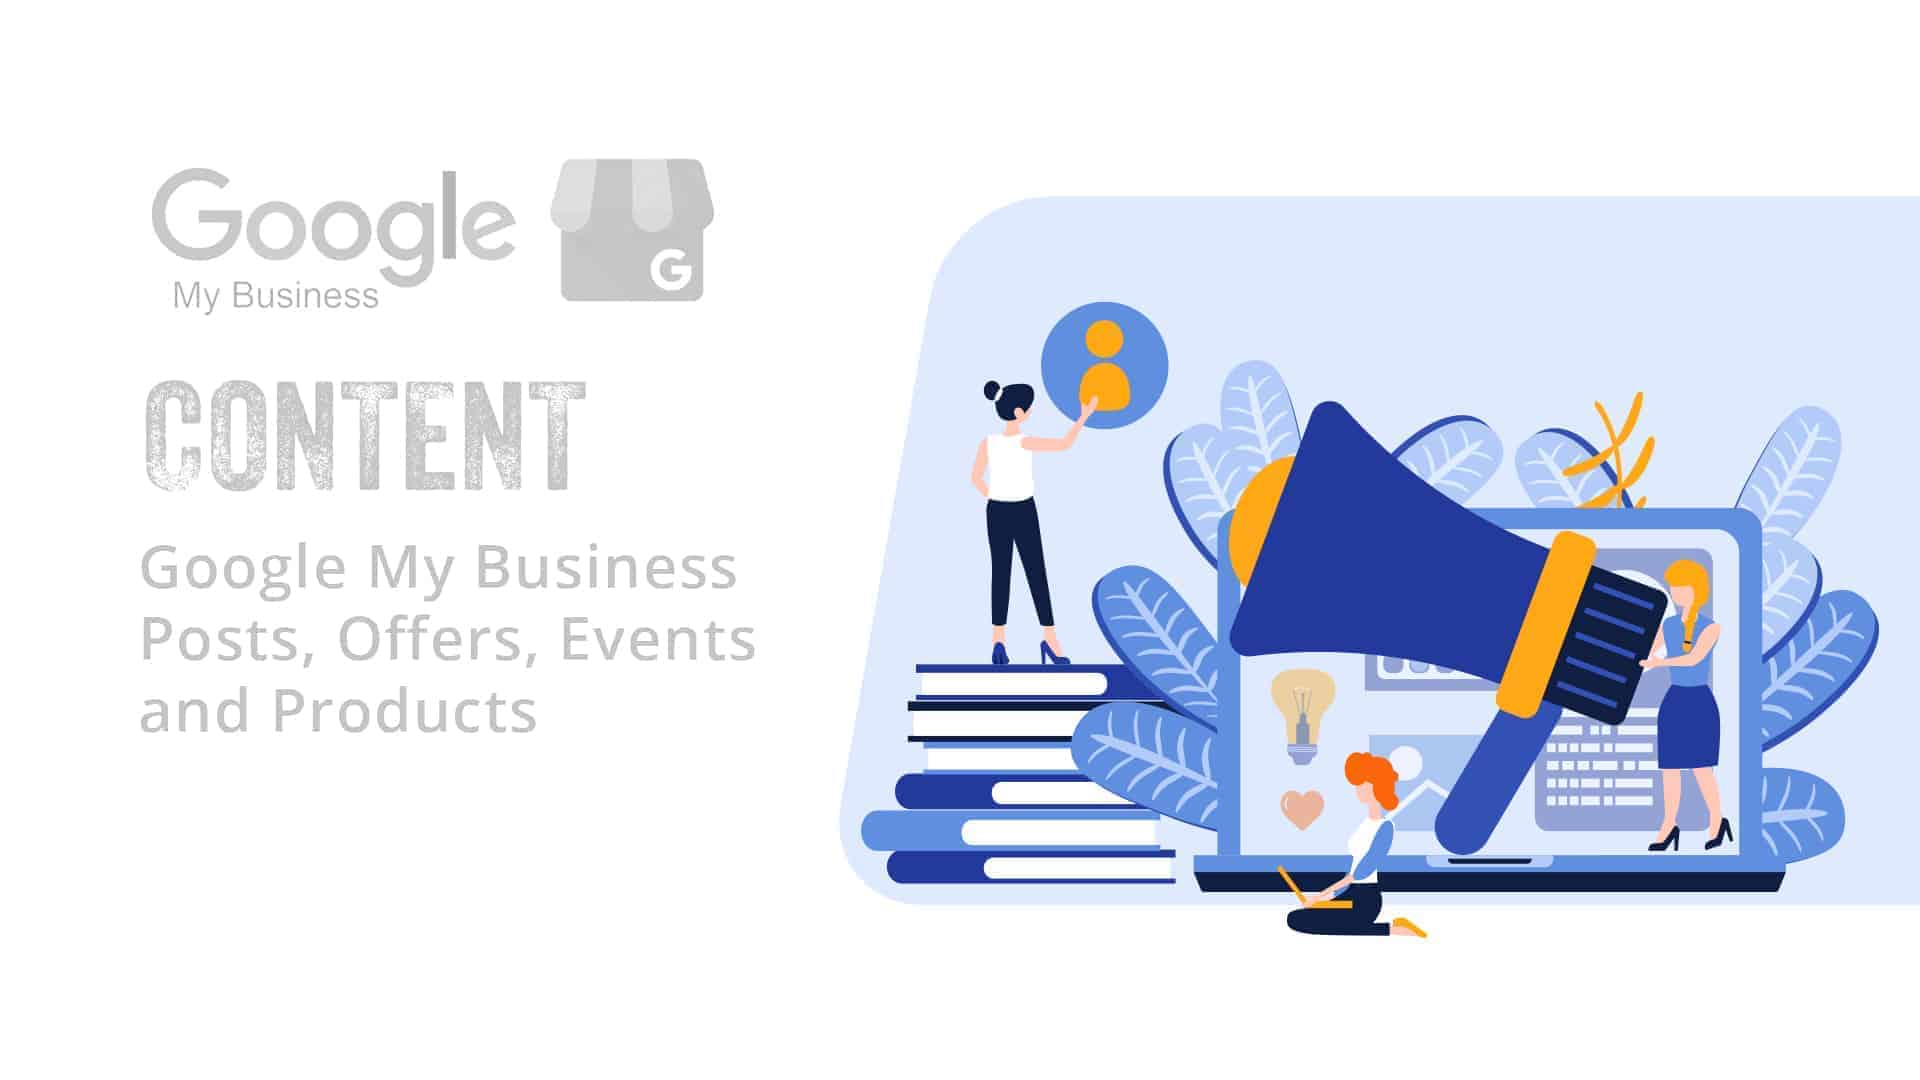 5. Creating Content for Google My Business